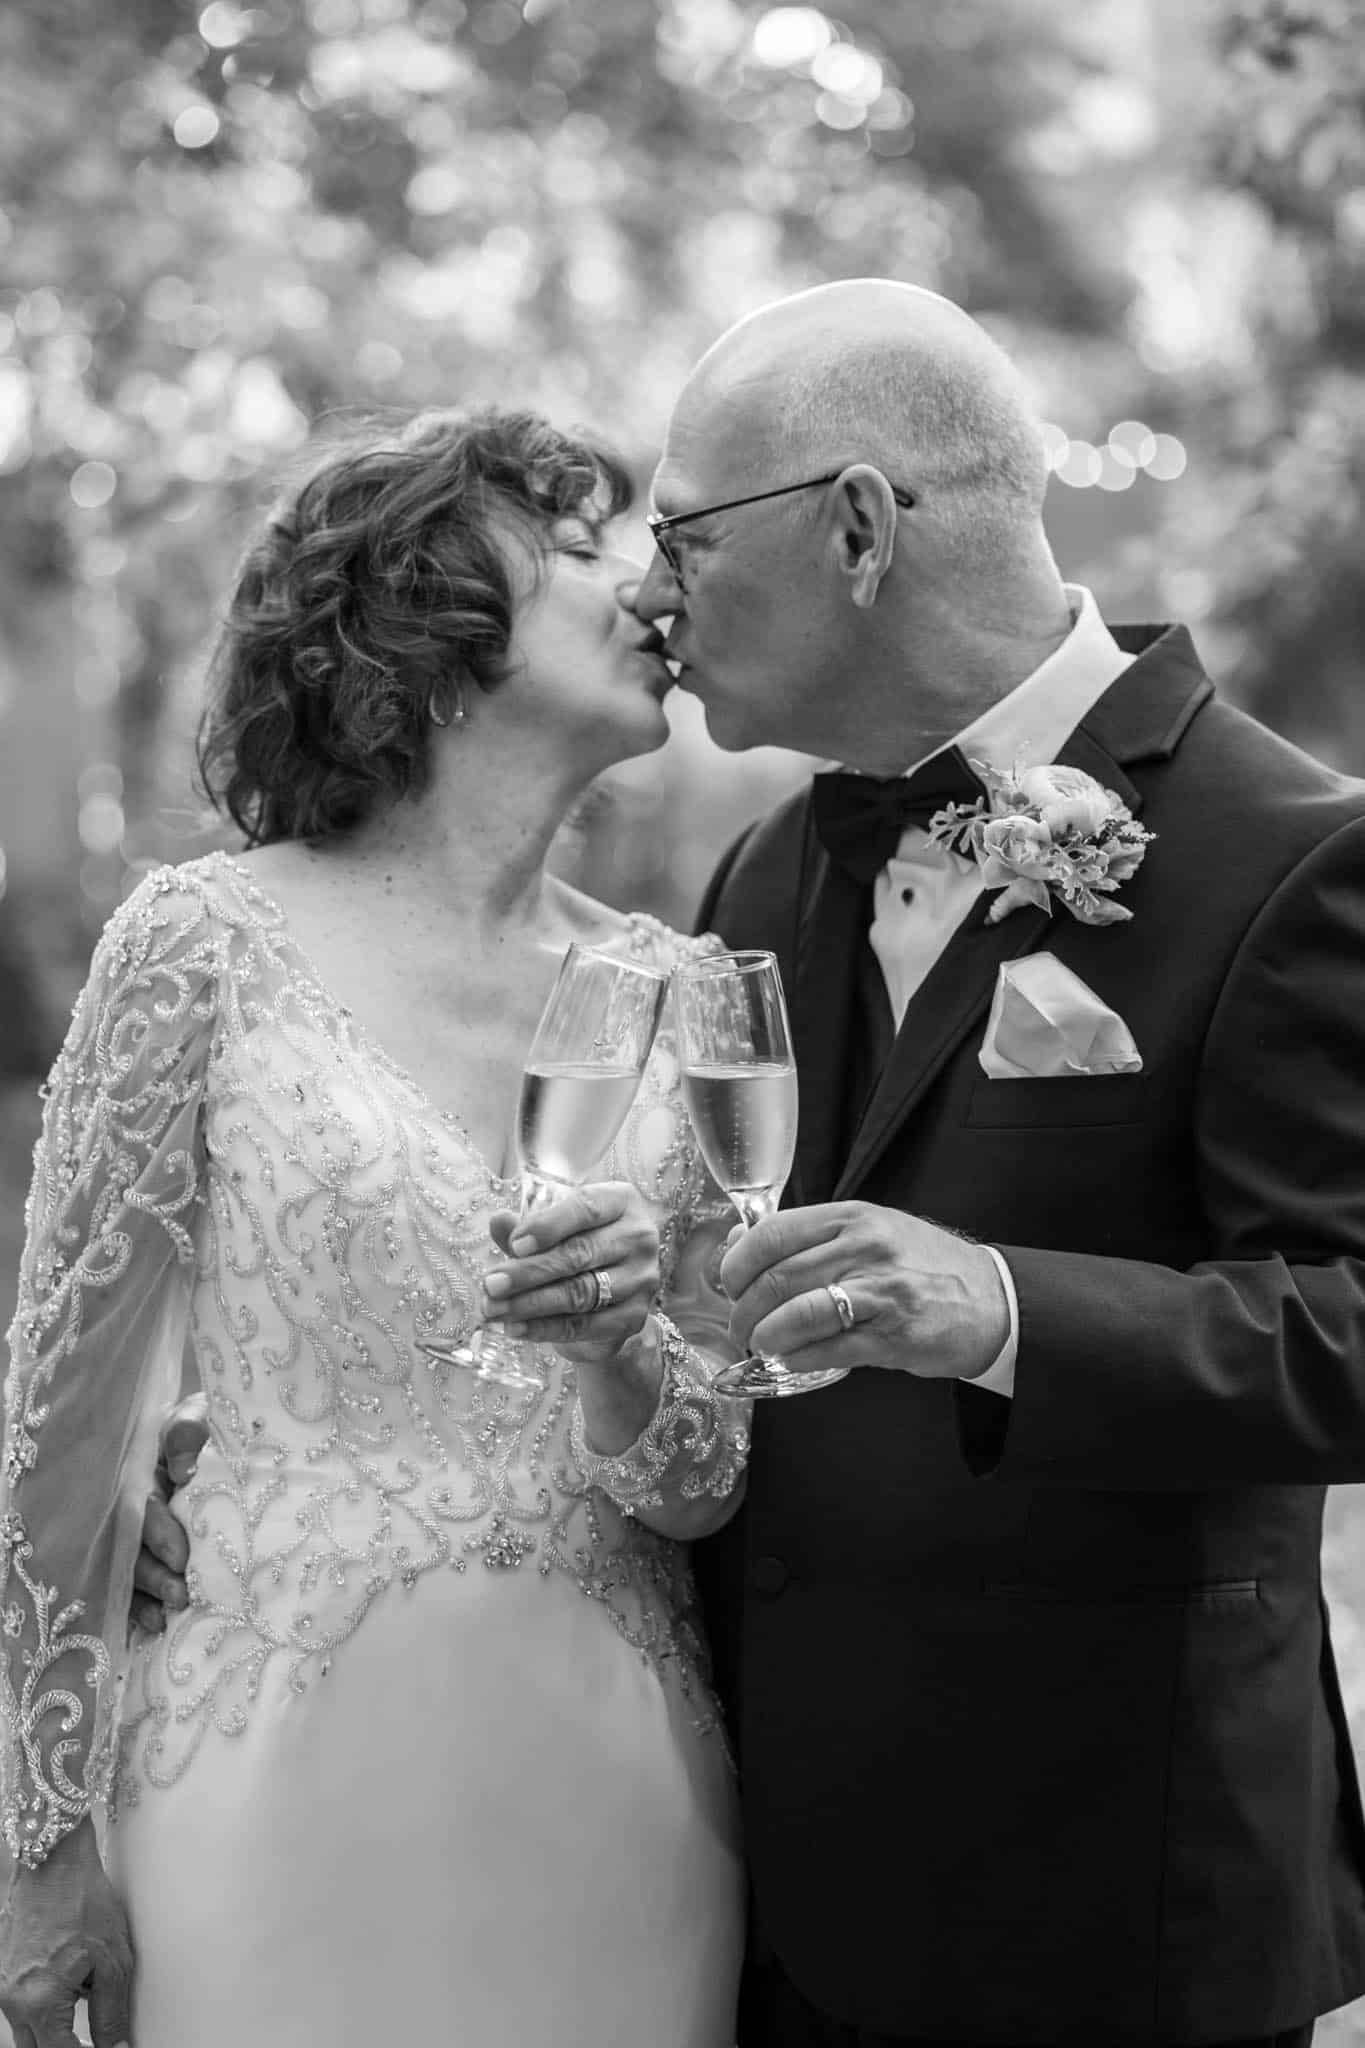 Santa Barbara wedding photographer photographs bride and groom toasting champagne glasses and kissing one another in a garden